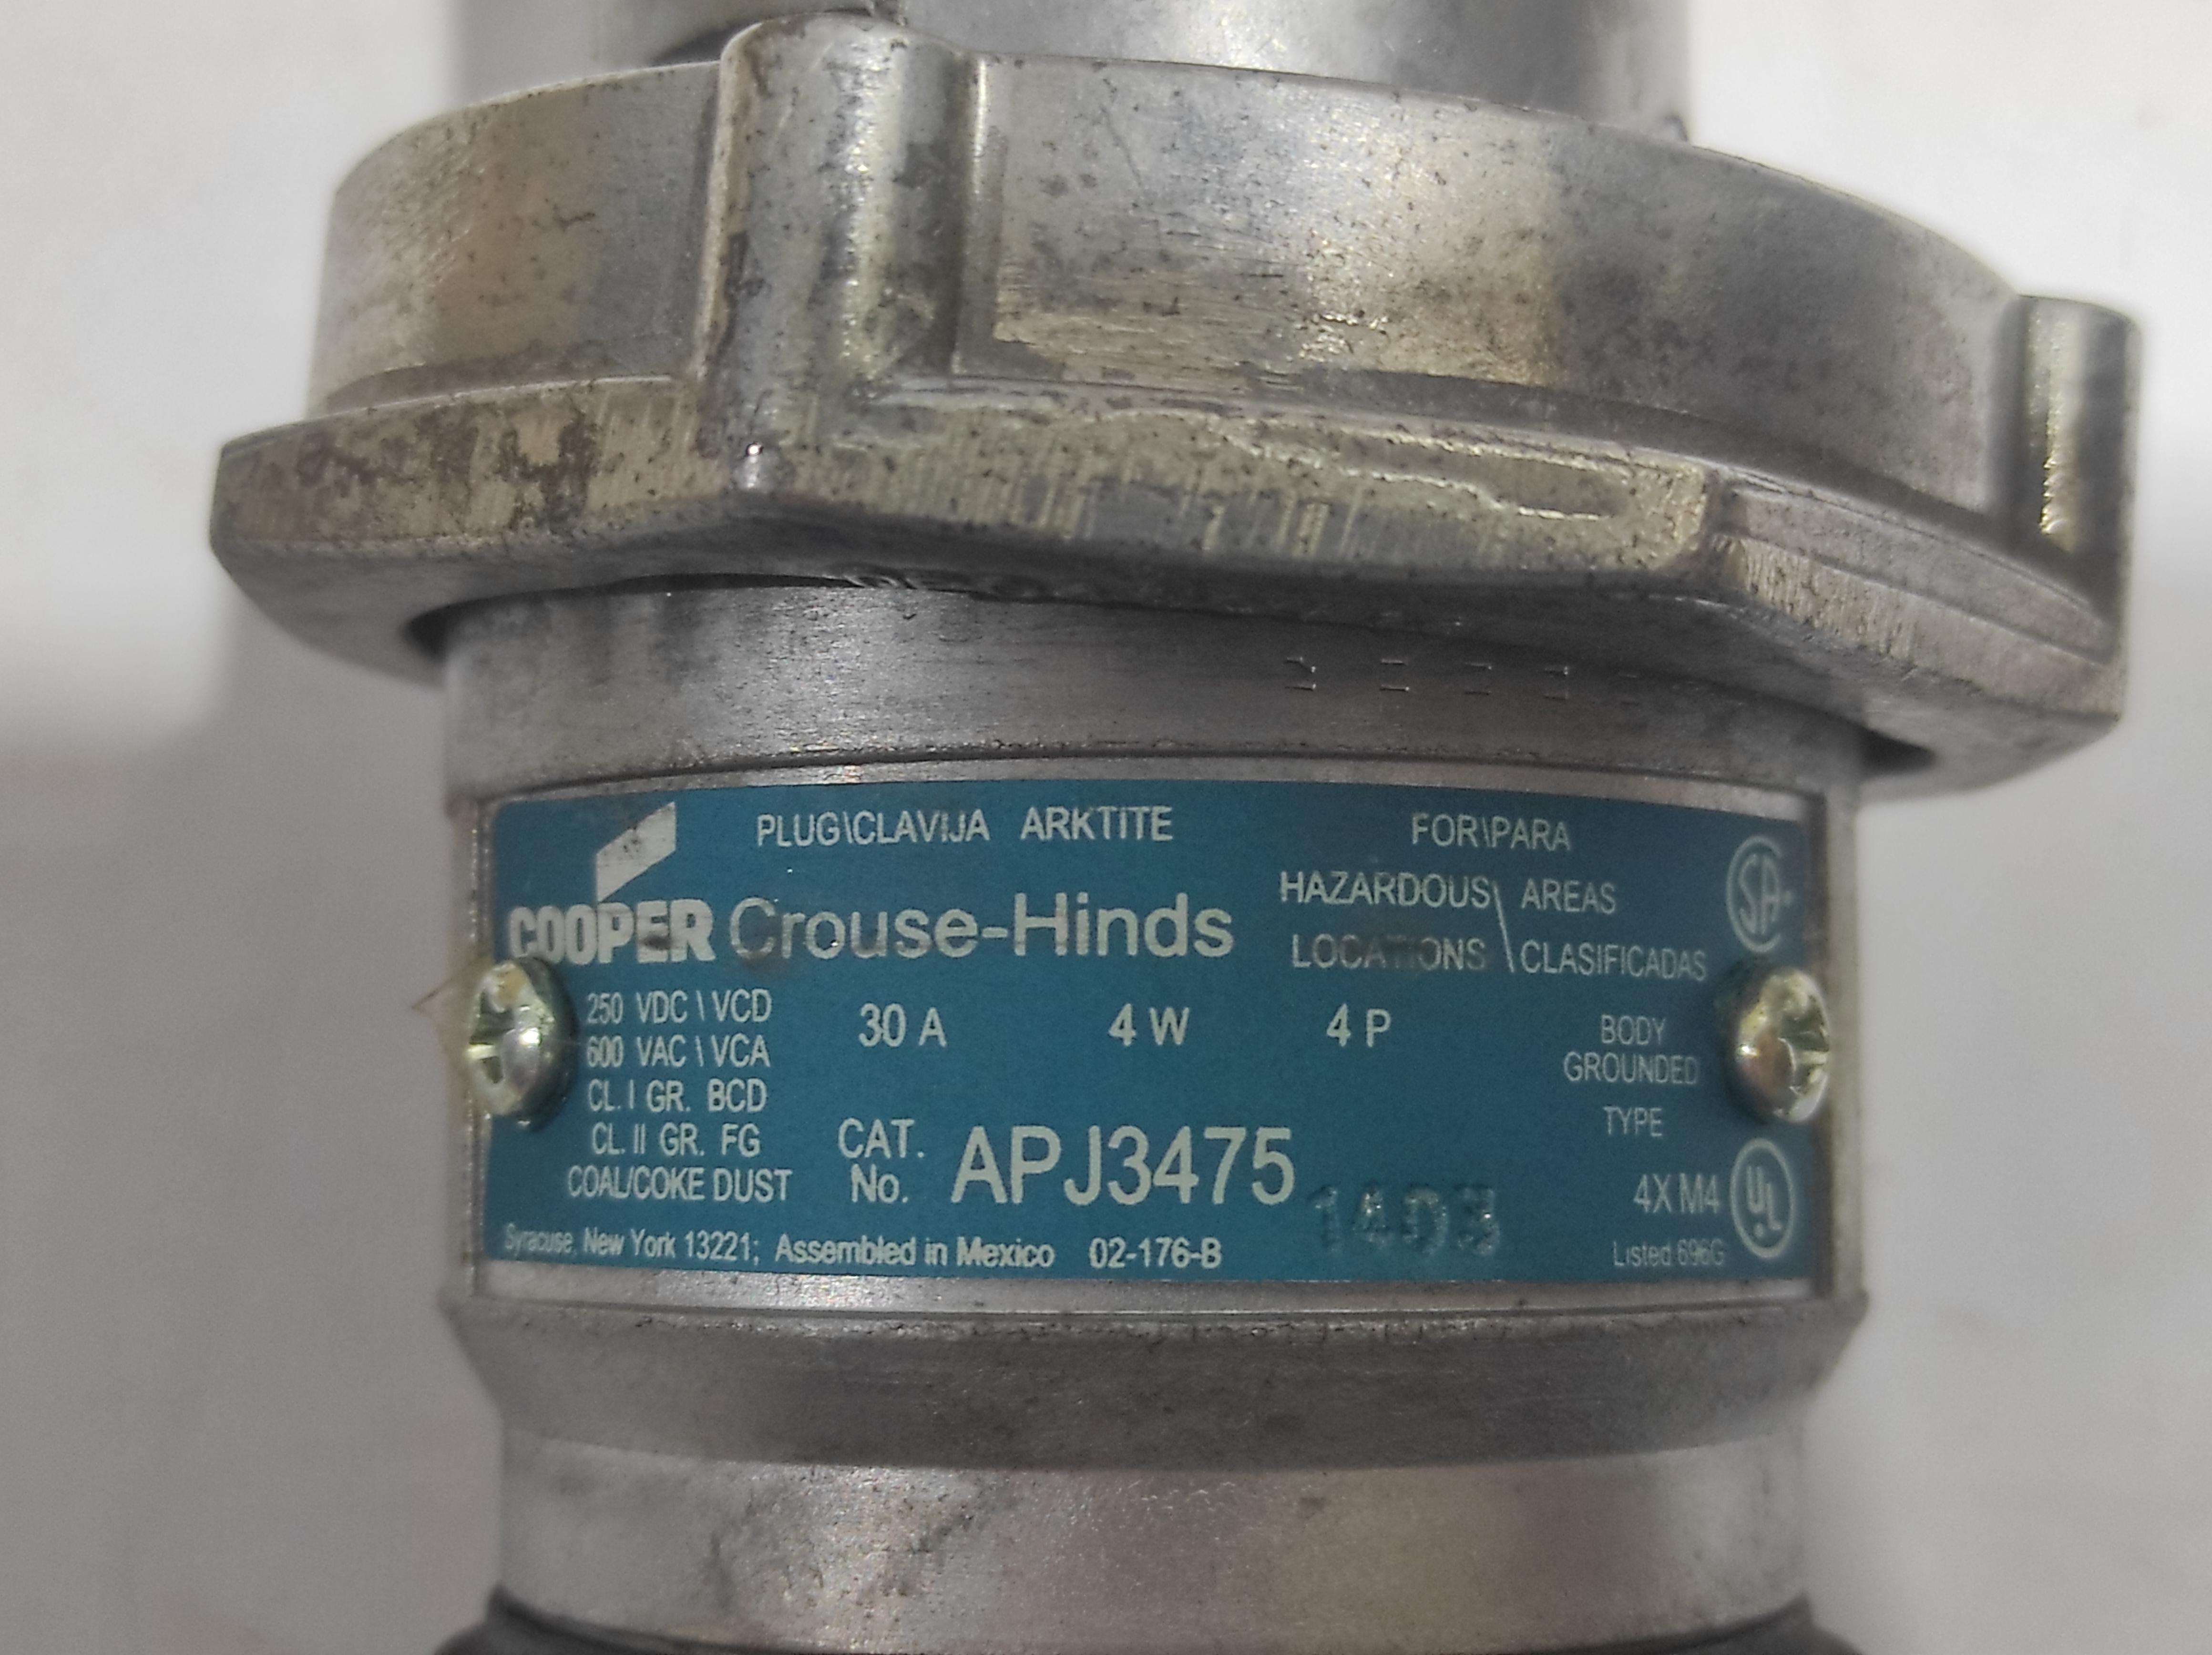 Cooper Crouse Hinds APJ3475 Model M4 Plug Body Grounded 30A 4W 4P